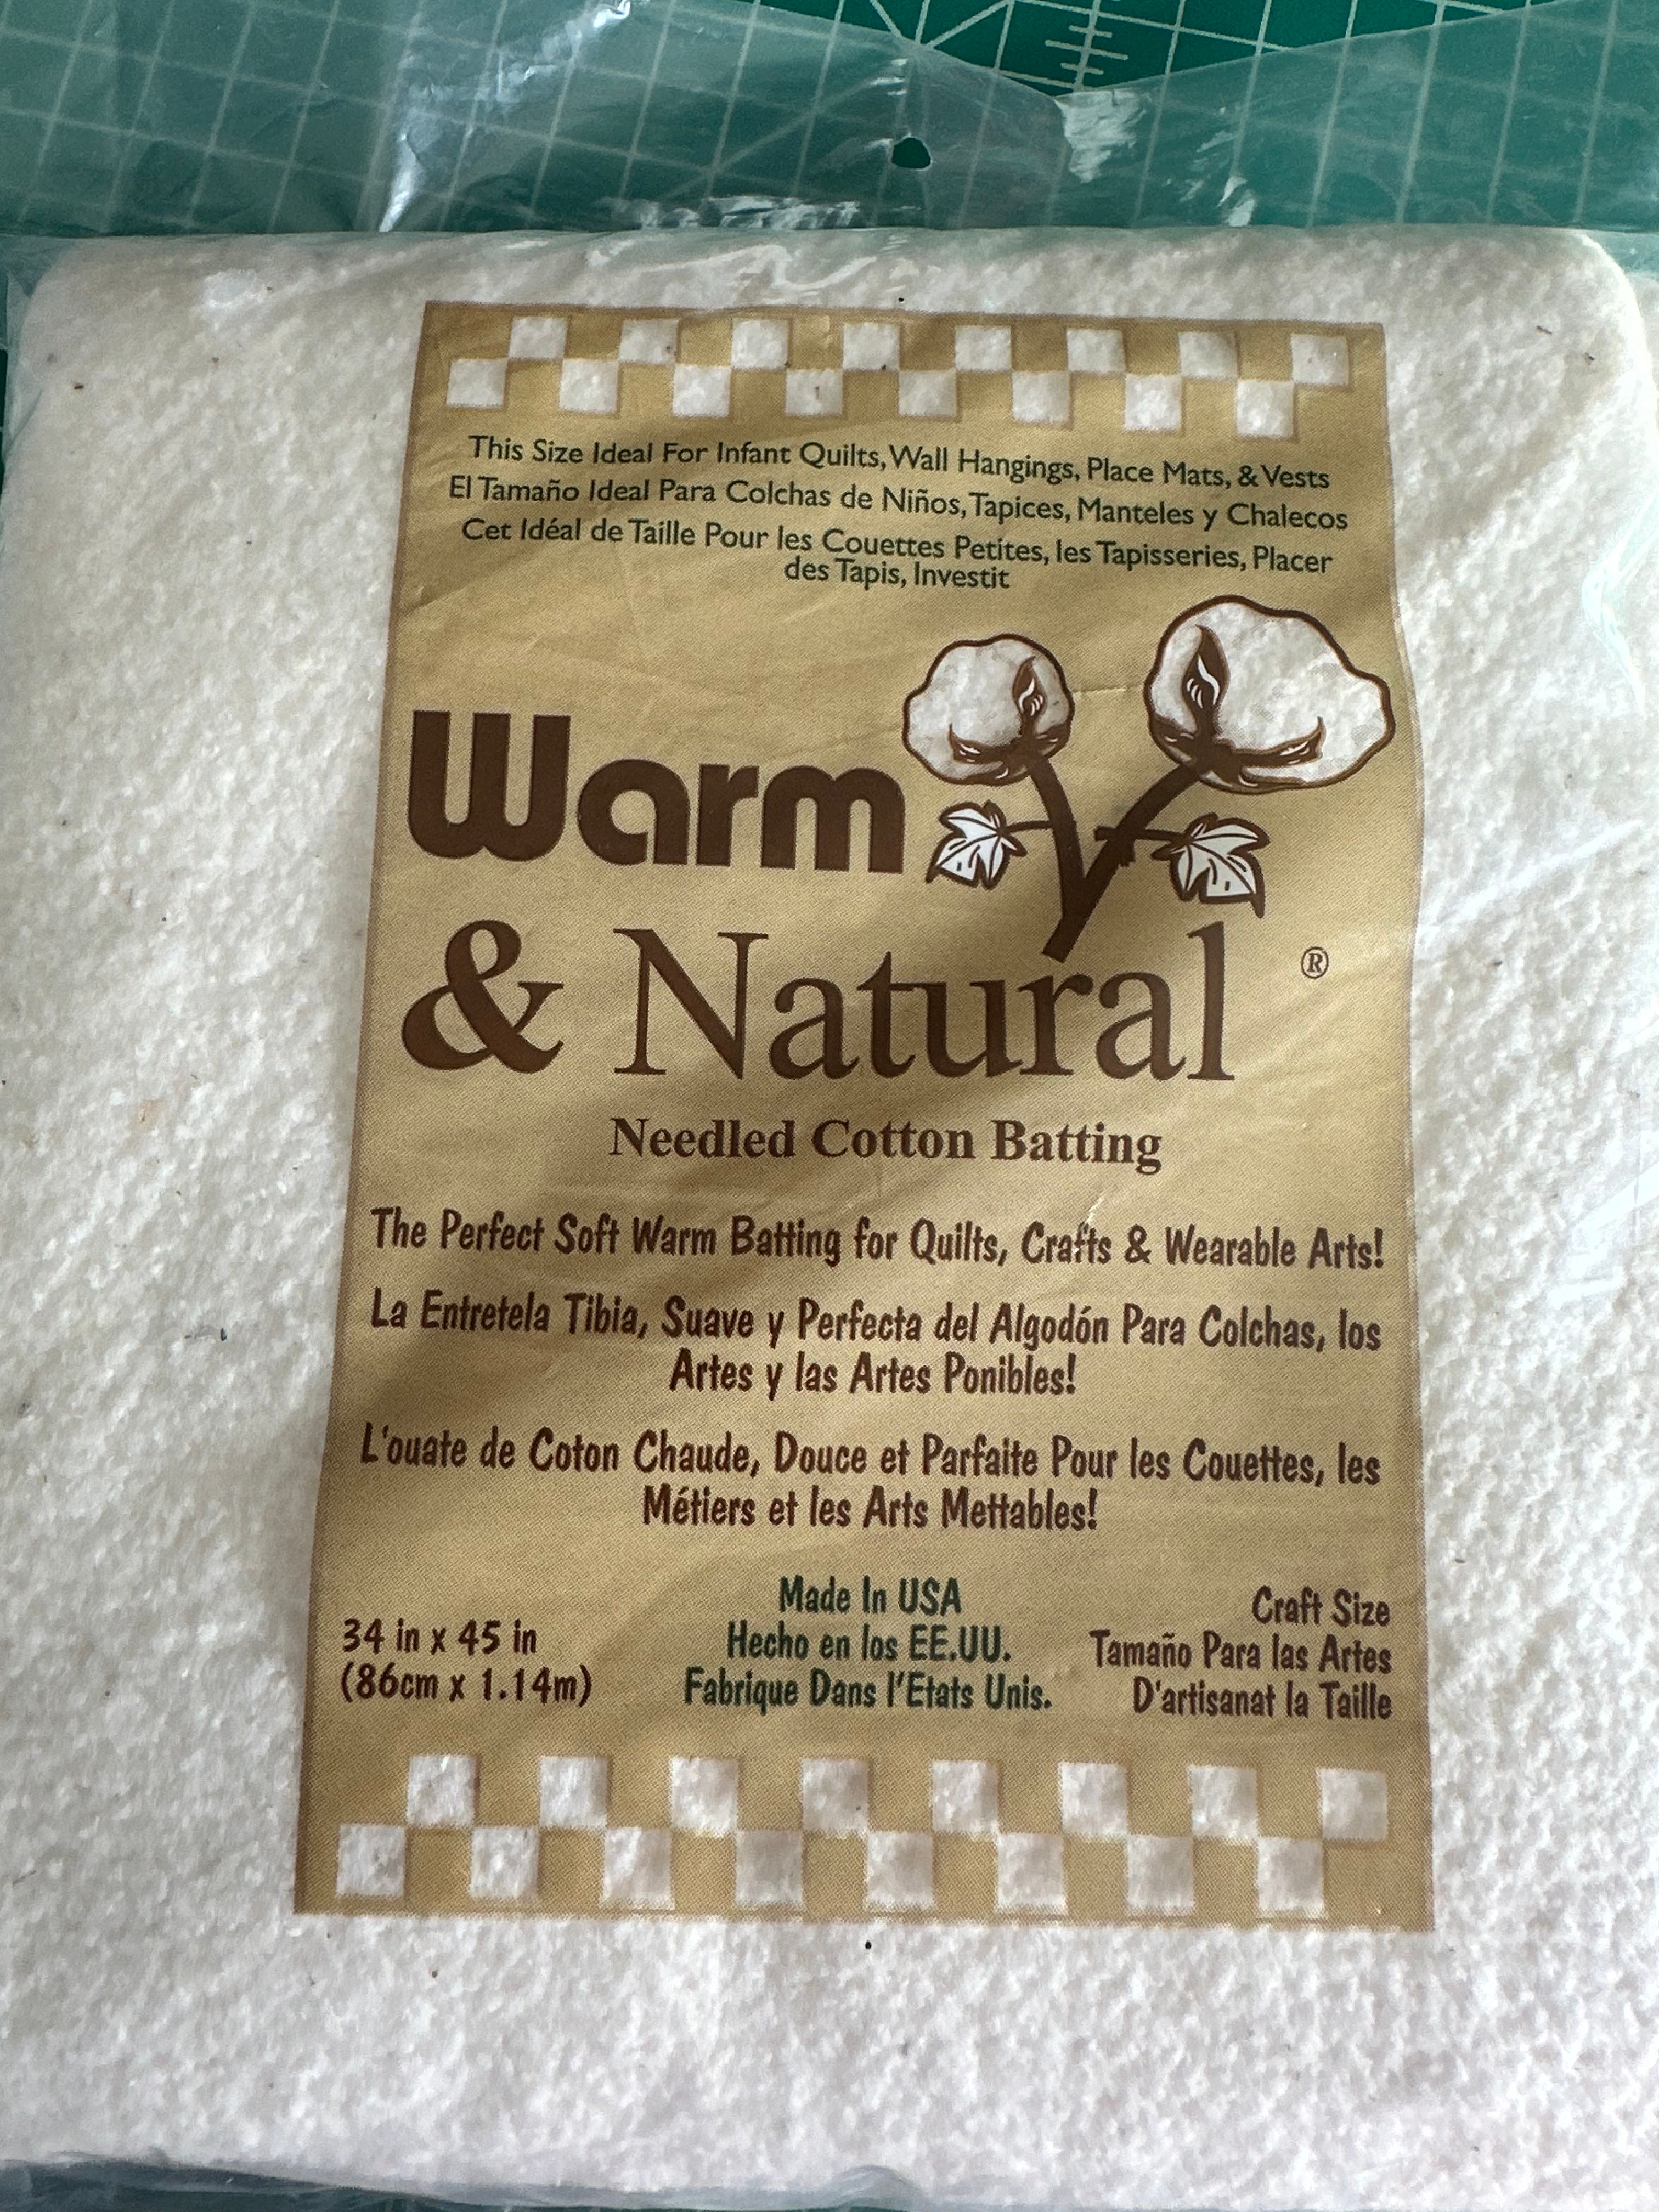 New Arrival: Warm & Natural Batting Craft 34x45 – The Fabric